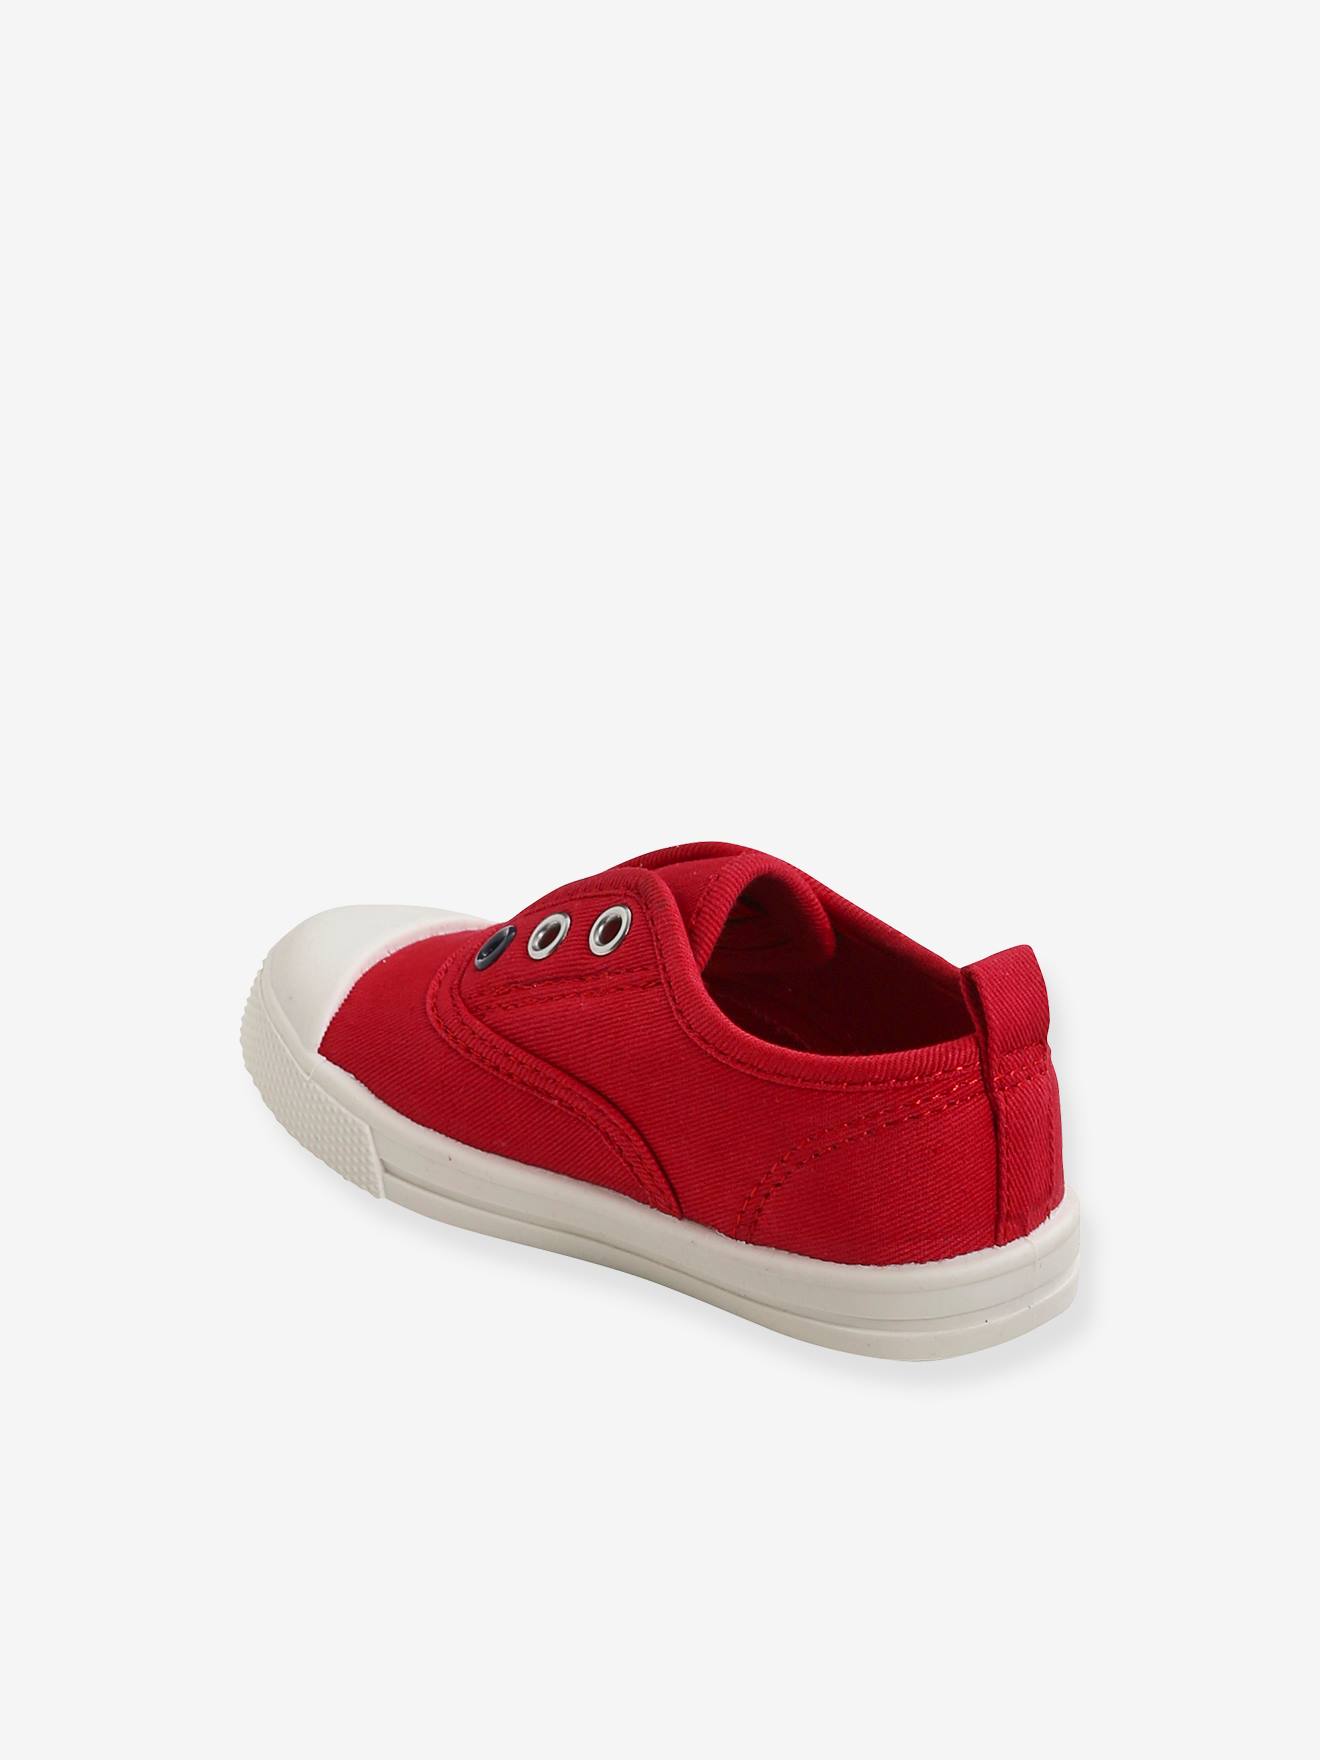 CONVERSE ALL STAR RED CANVAS TIE SNEAKERS SHOES BABY TODDLER SIZE 3 NWT |  Toddler sizes, Baby toddler, Converse all star